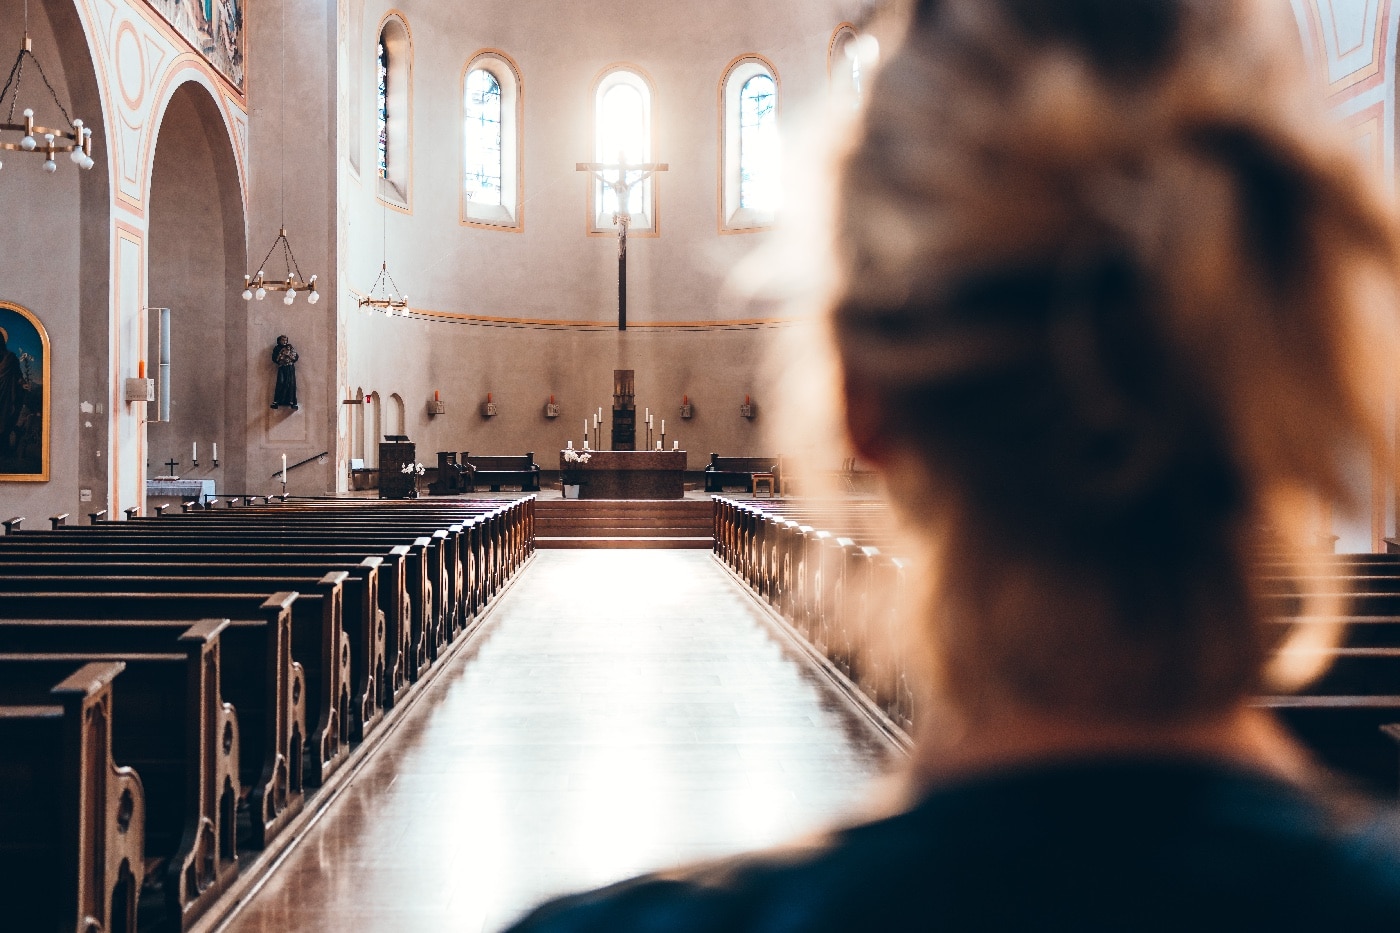 This photo shows us the inside of a large church with a woman in the foreground. Empty pews line both sides of the main walkway. Church security plans should take all of the features into account.